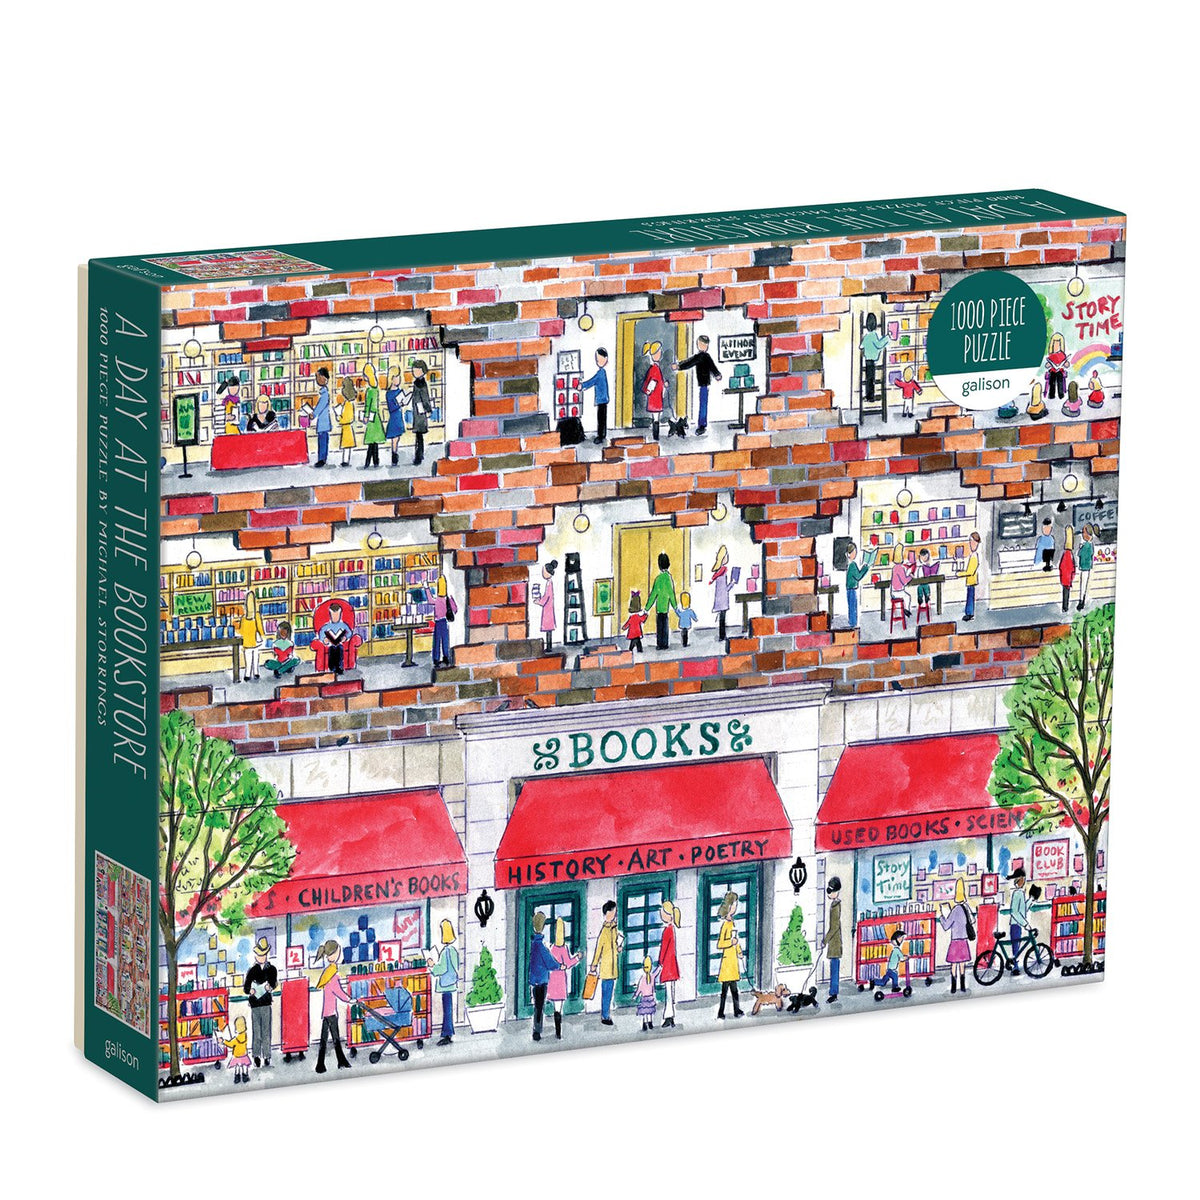 "A Day at the Bookstore" 1000 Piece Puzzle